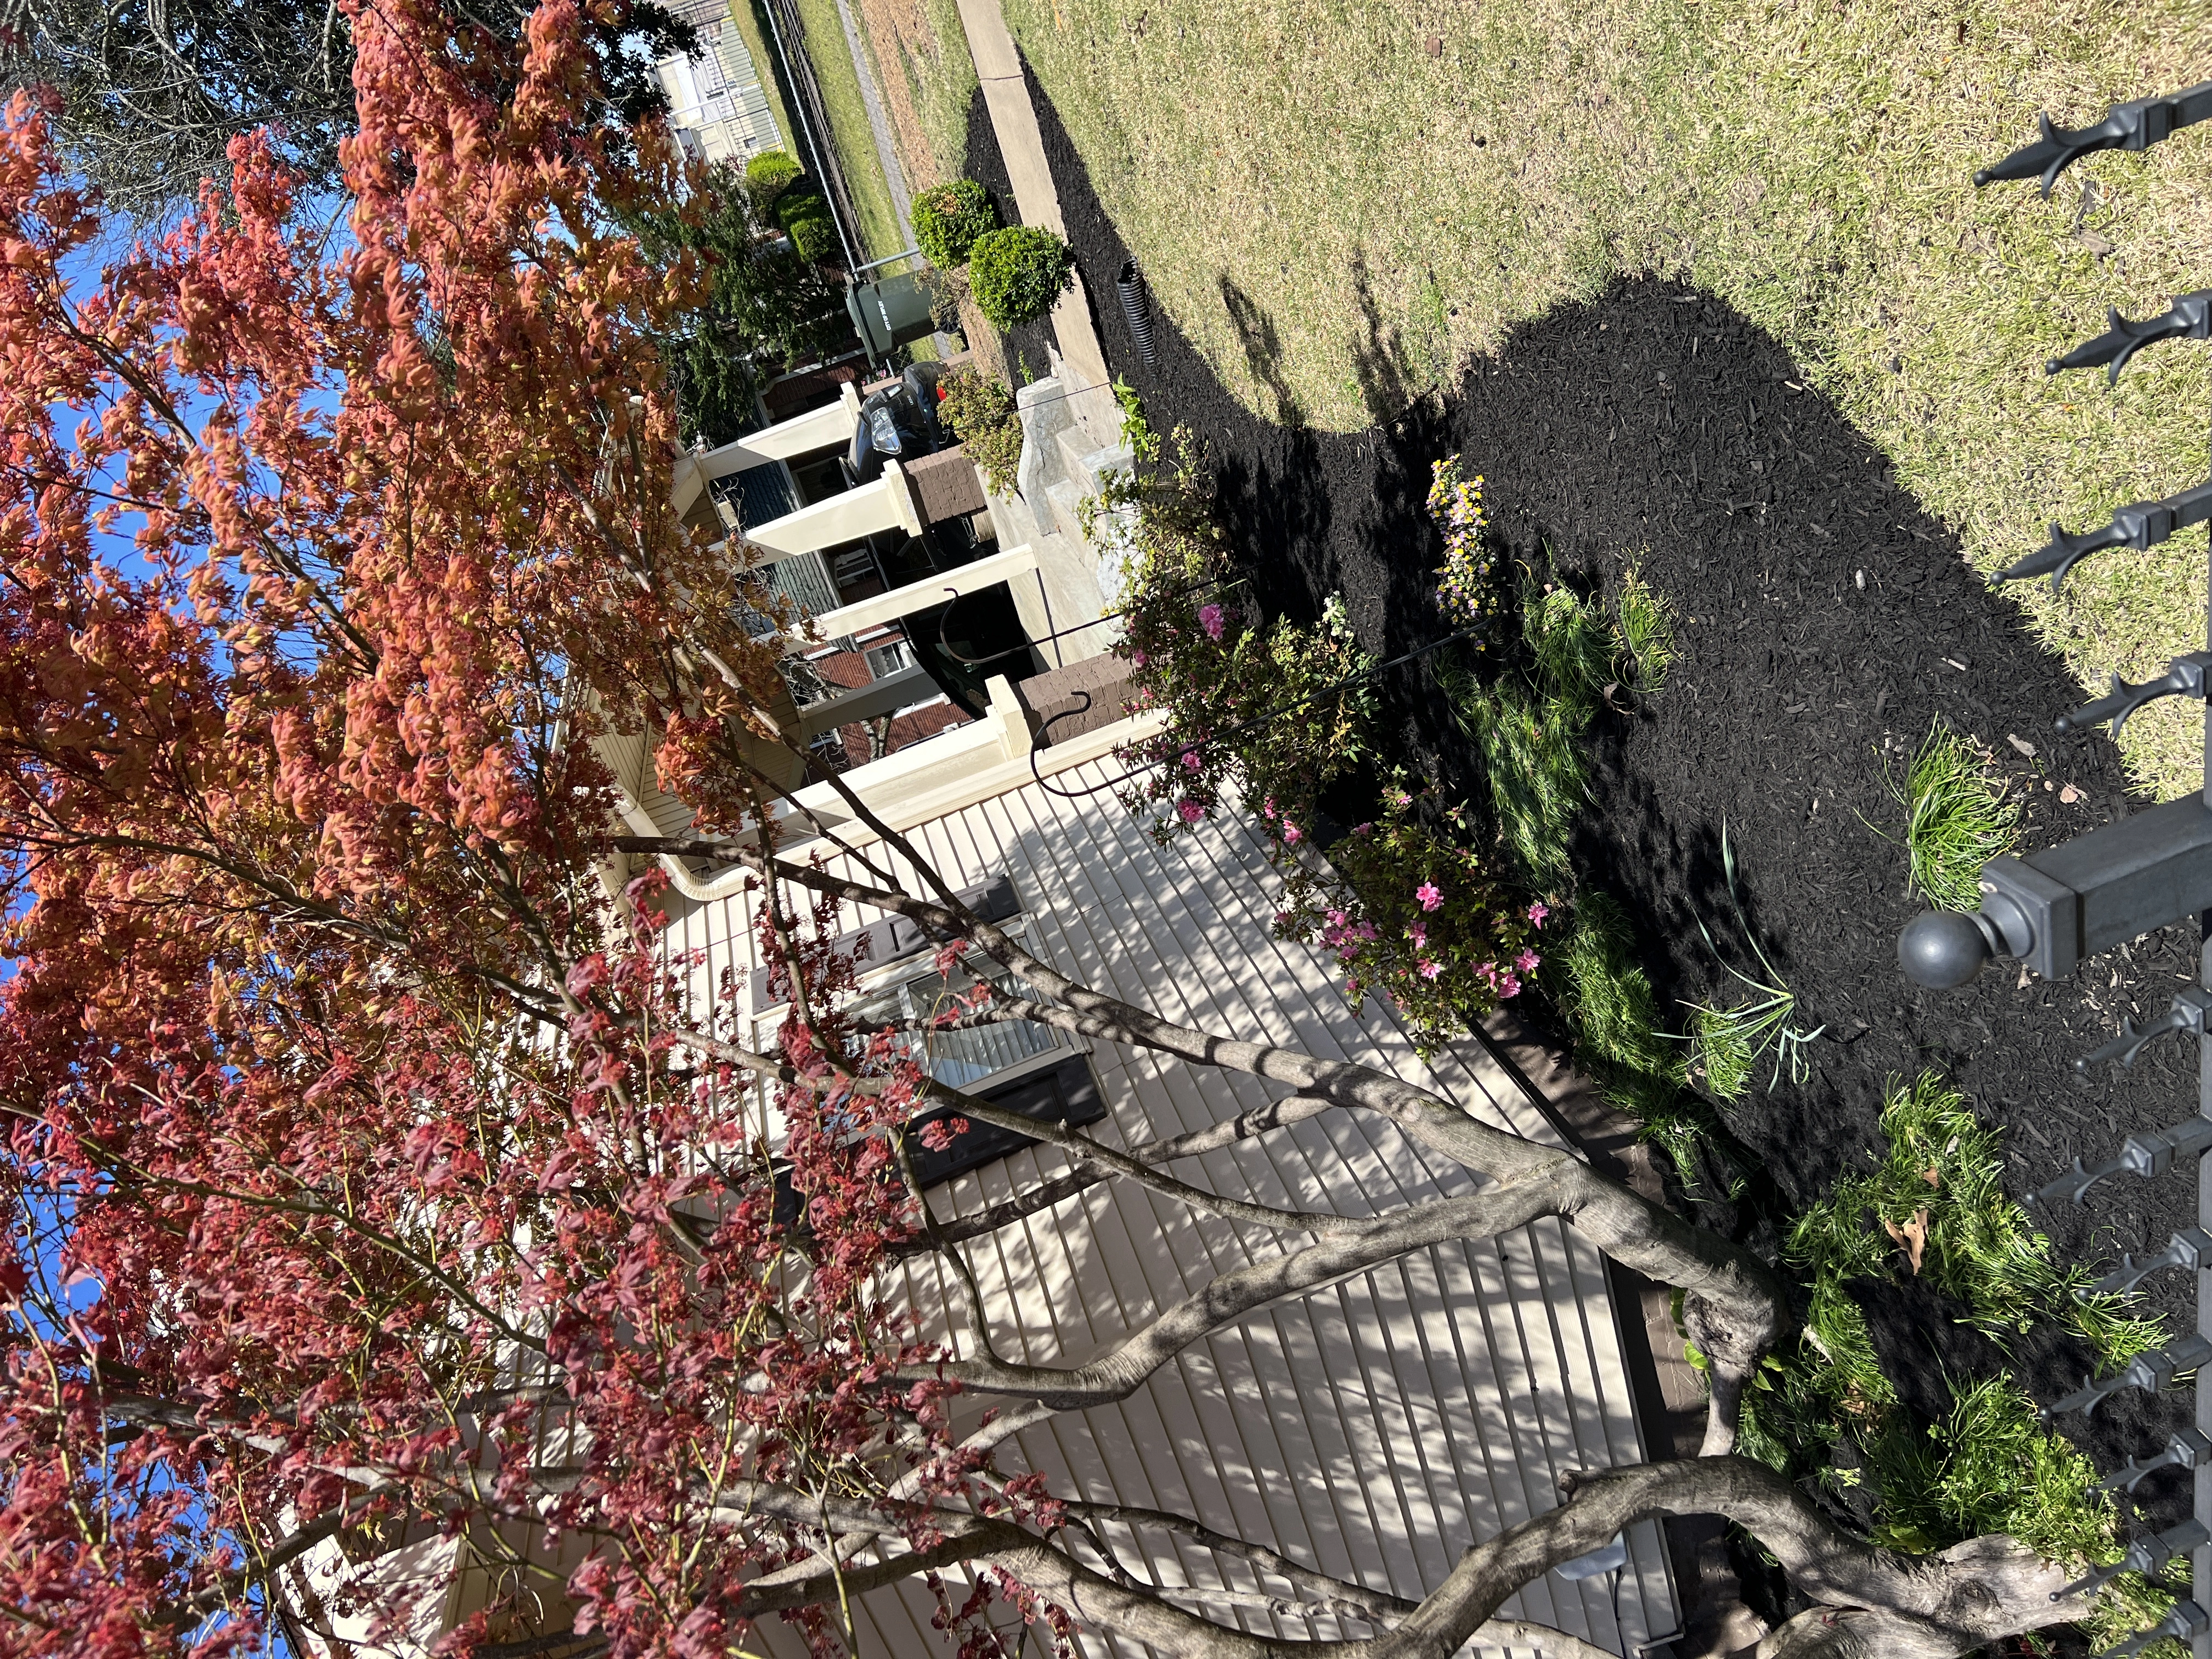 Ripley, TN that has just had new black dyed mulch installed.